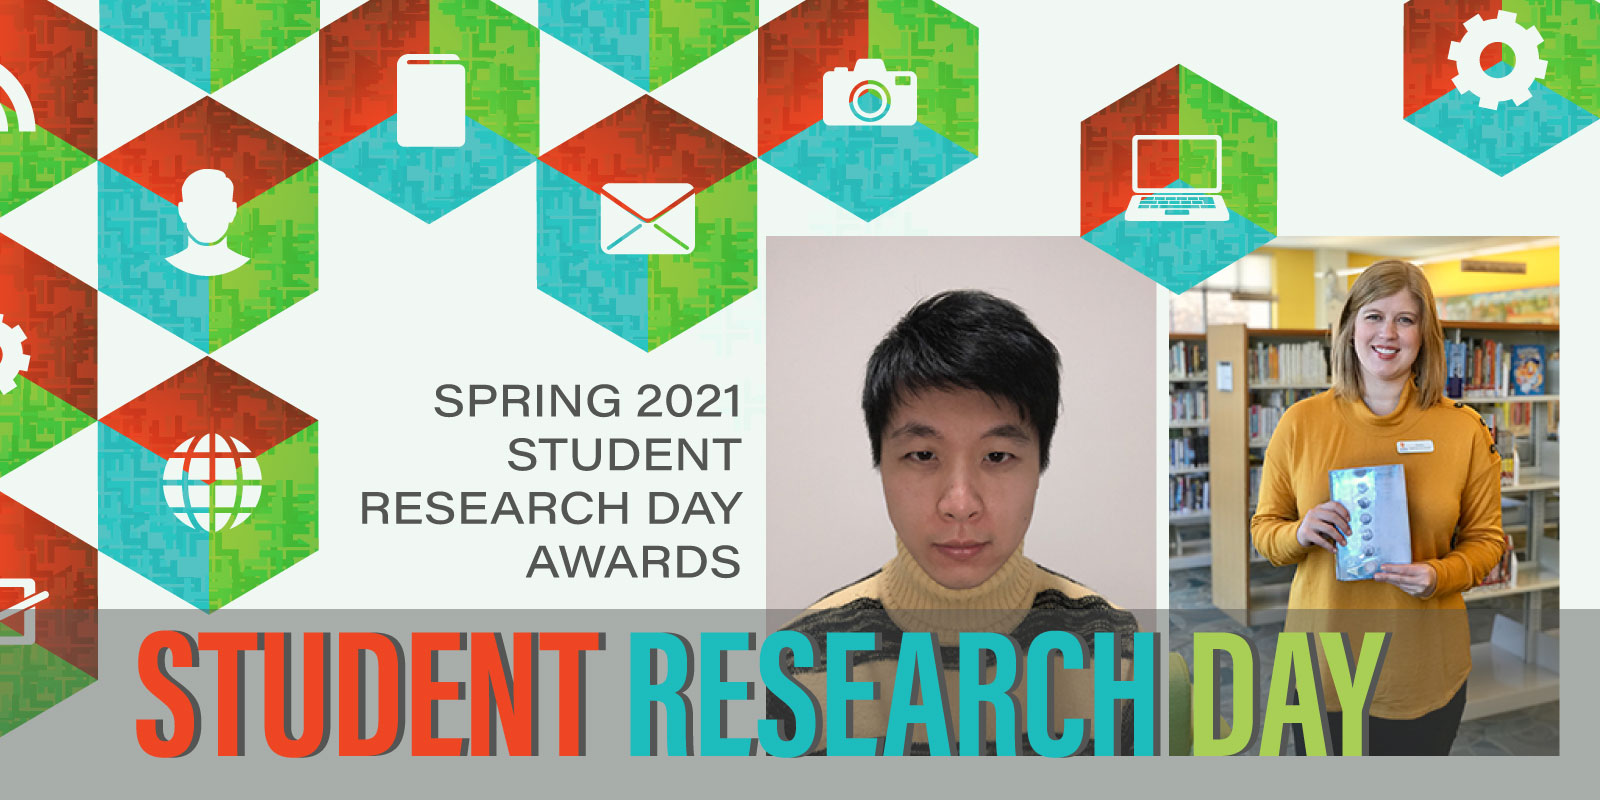 SOIS Student Research Day Awards – Spring 2021